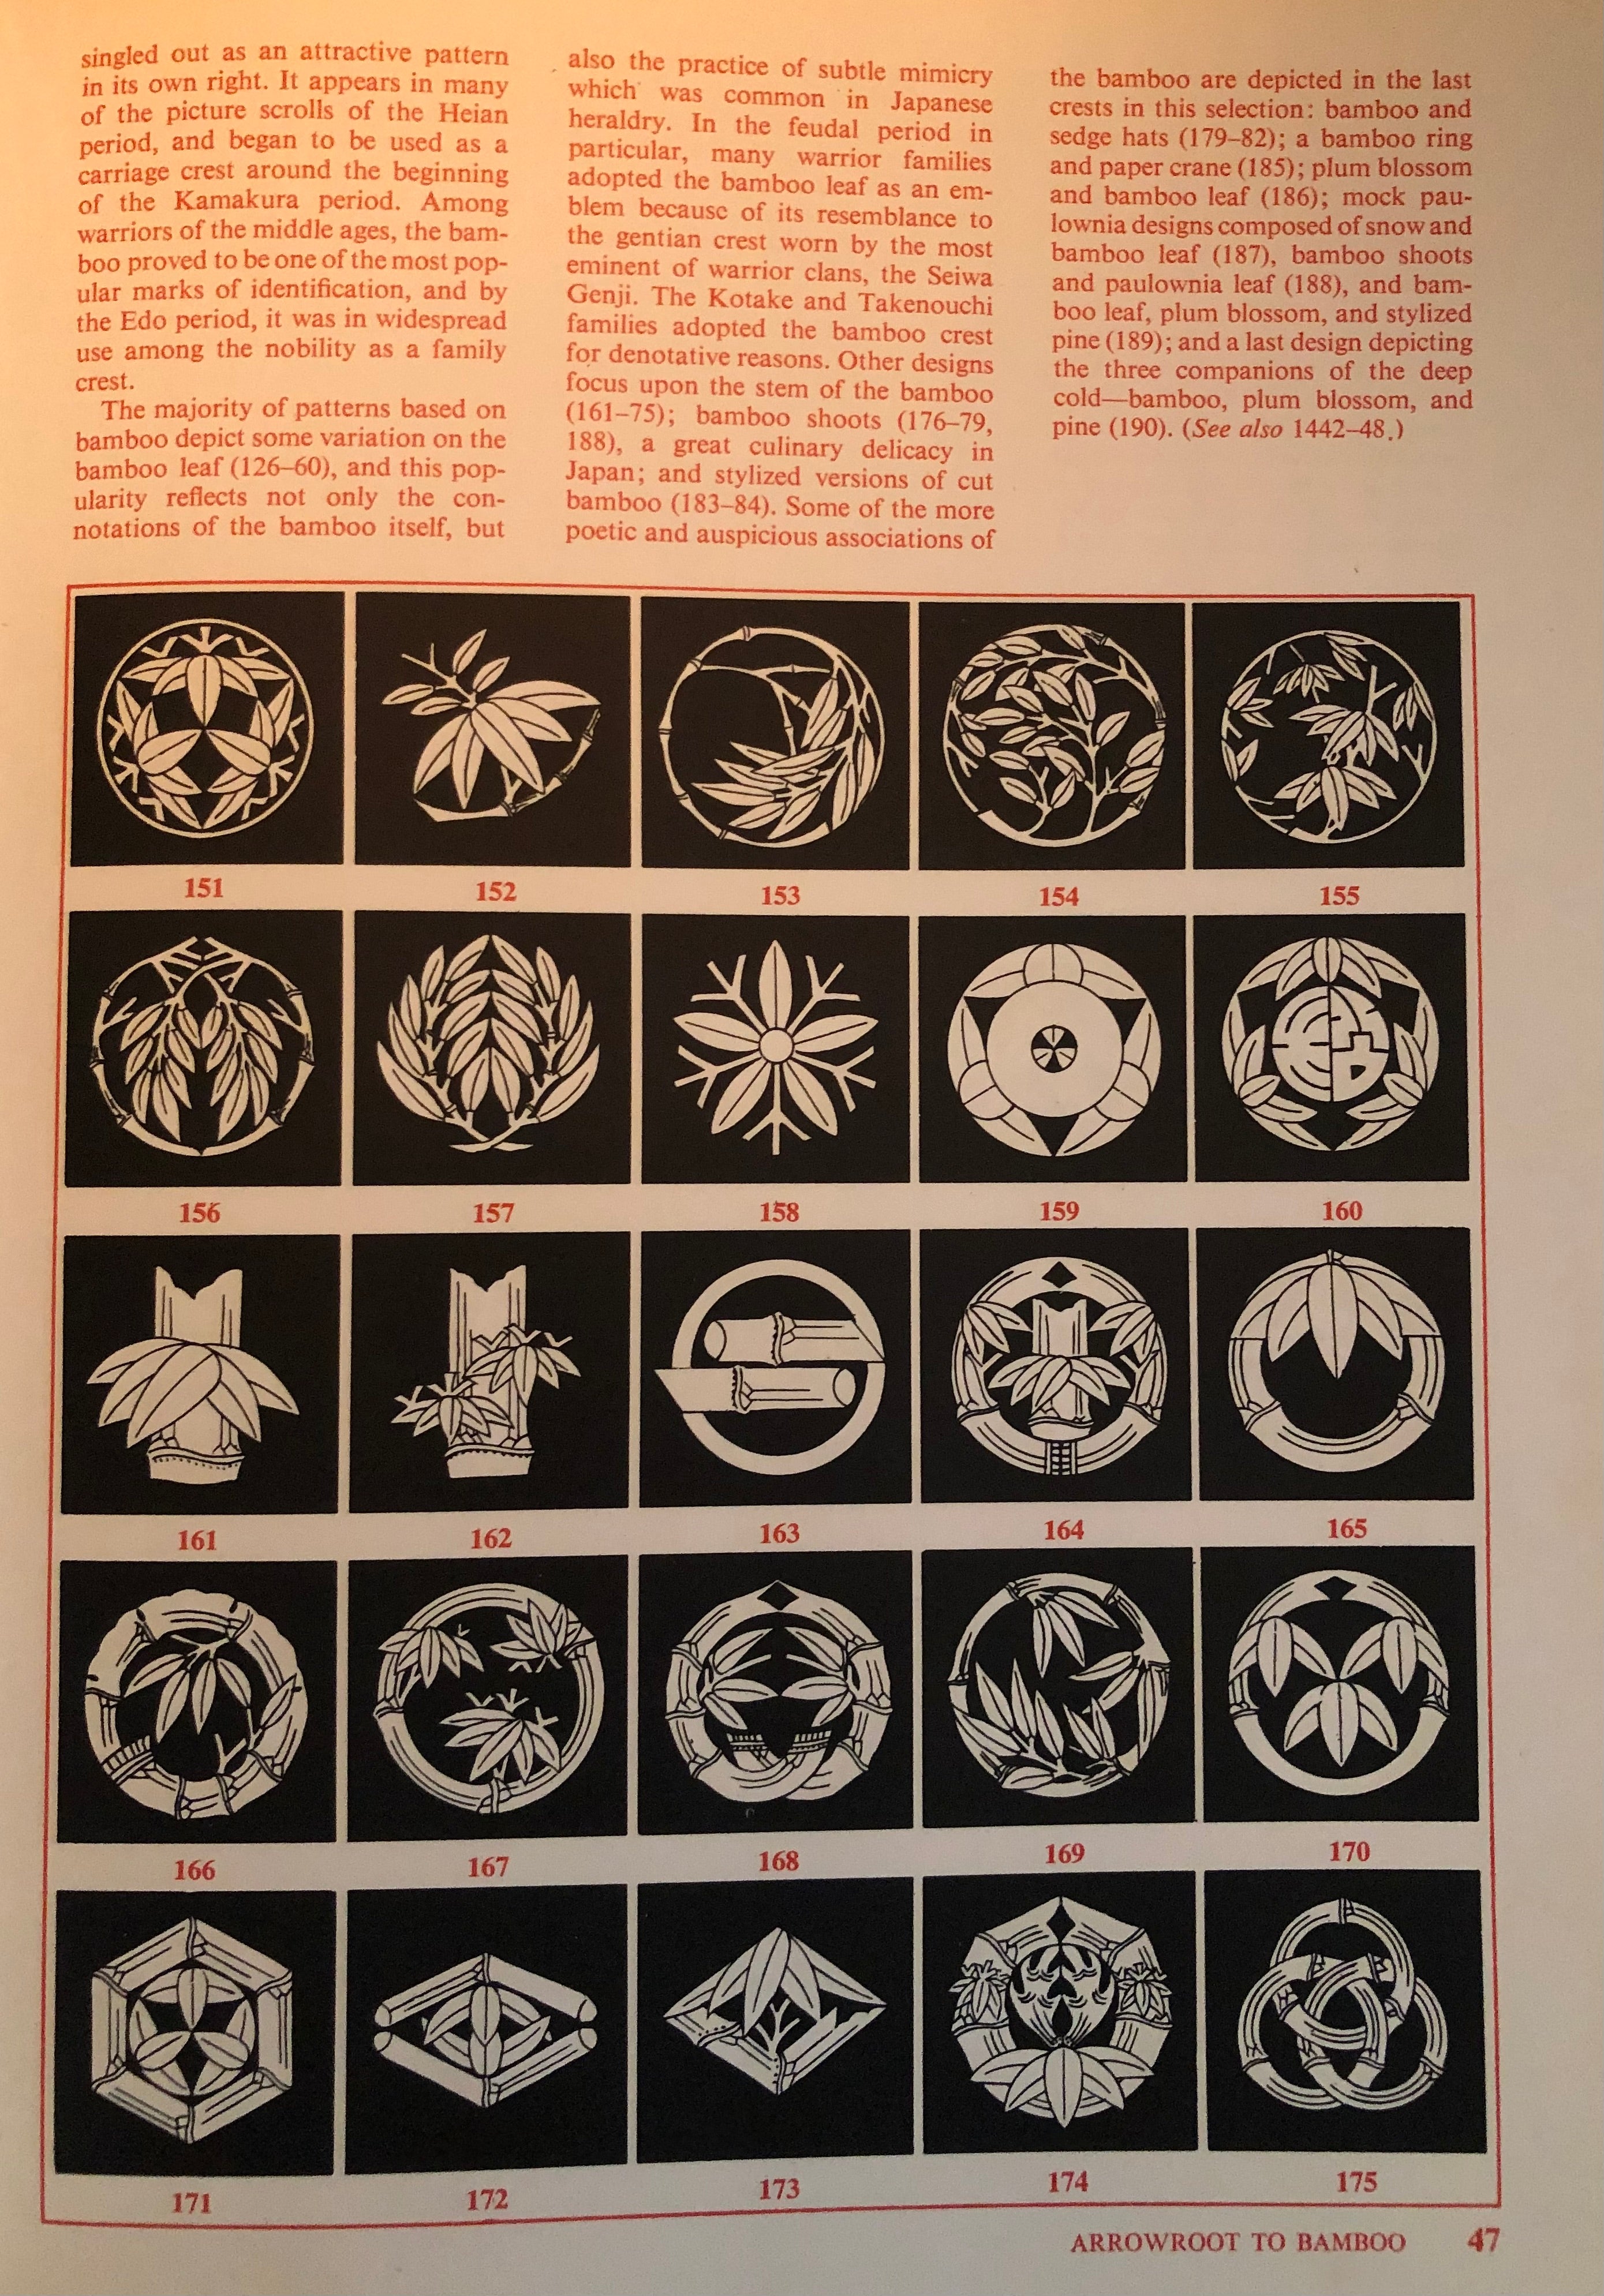 The Elements of Japanese Design by John W. Dower